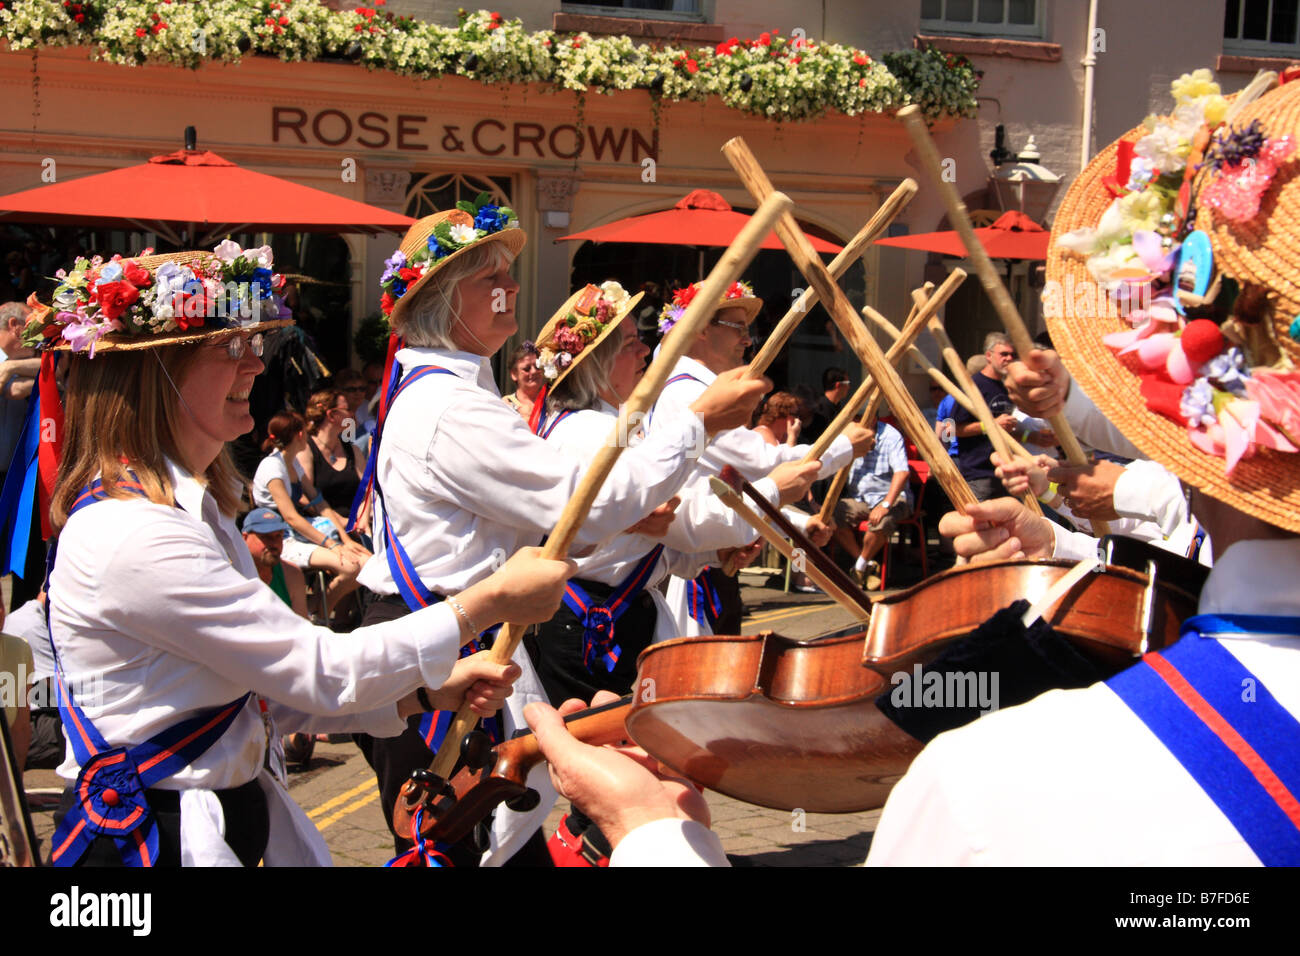 Morris dancers perform with sticks outside the Rose & Crown Pubic House at Warwick Folk Festival, Warwick, UK Stock Photo